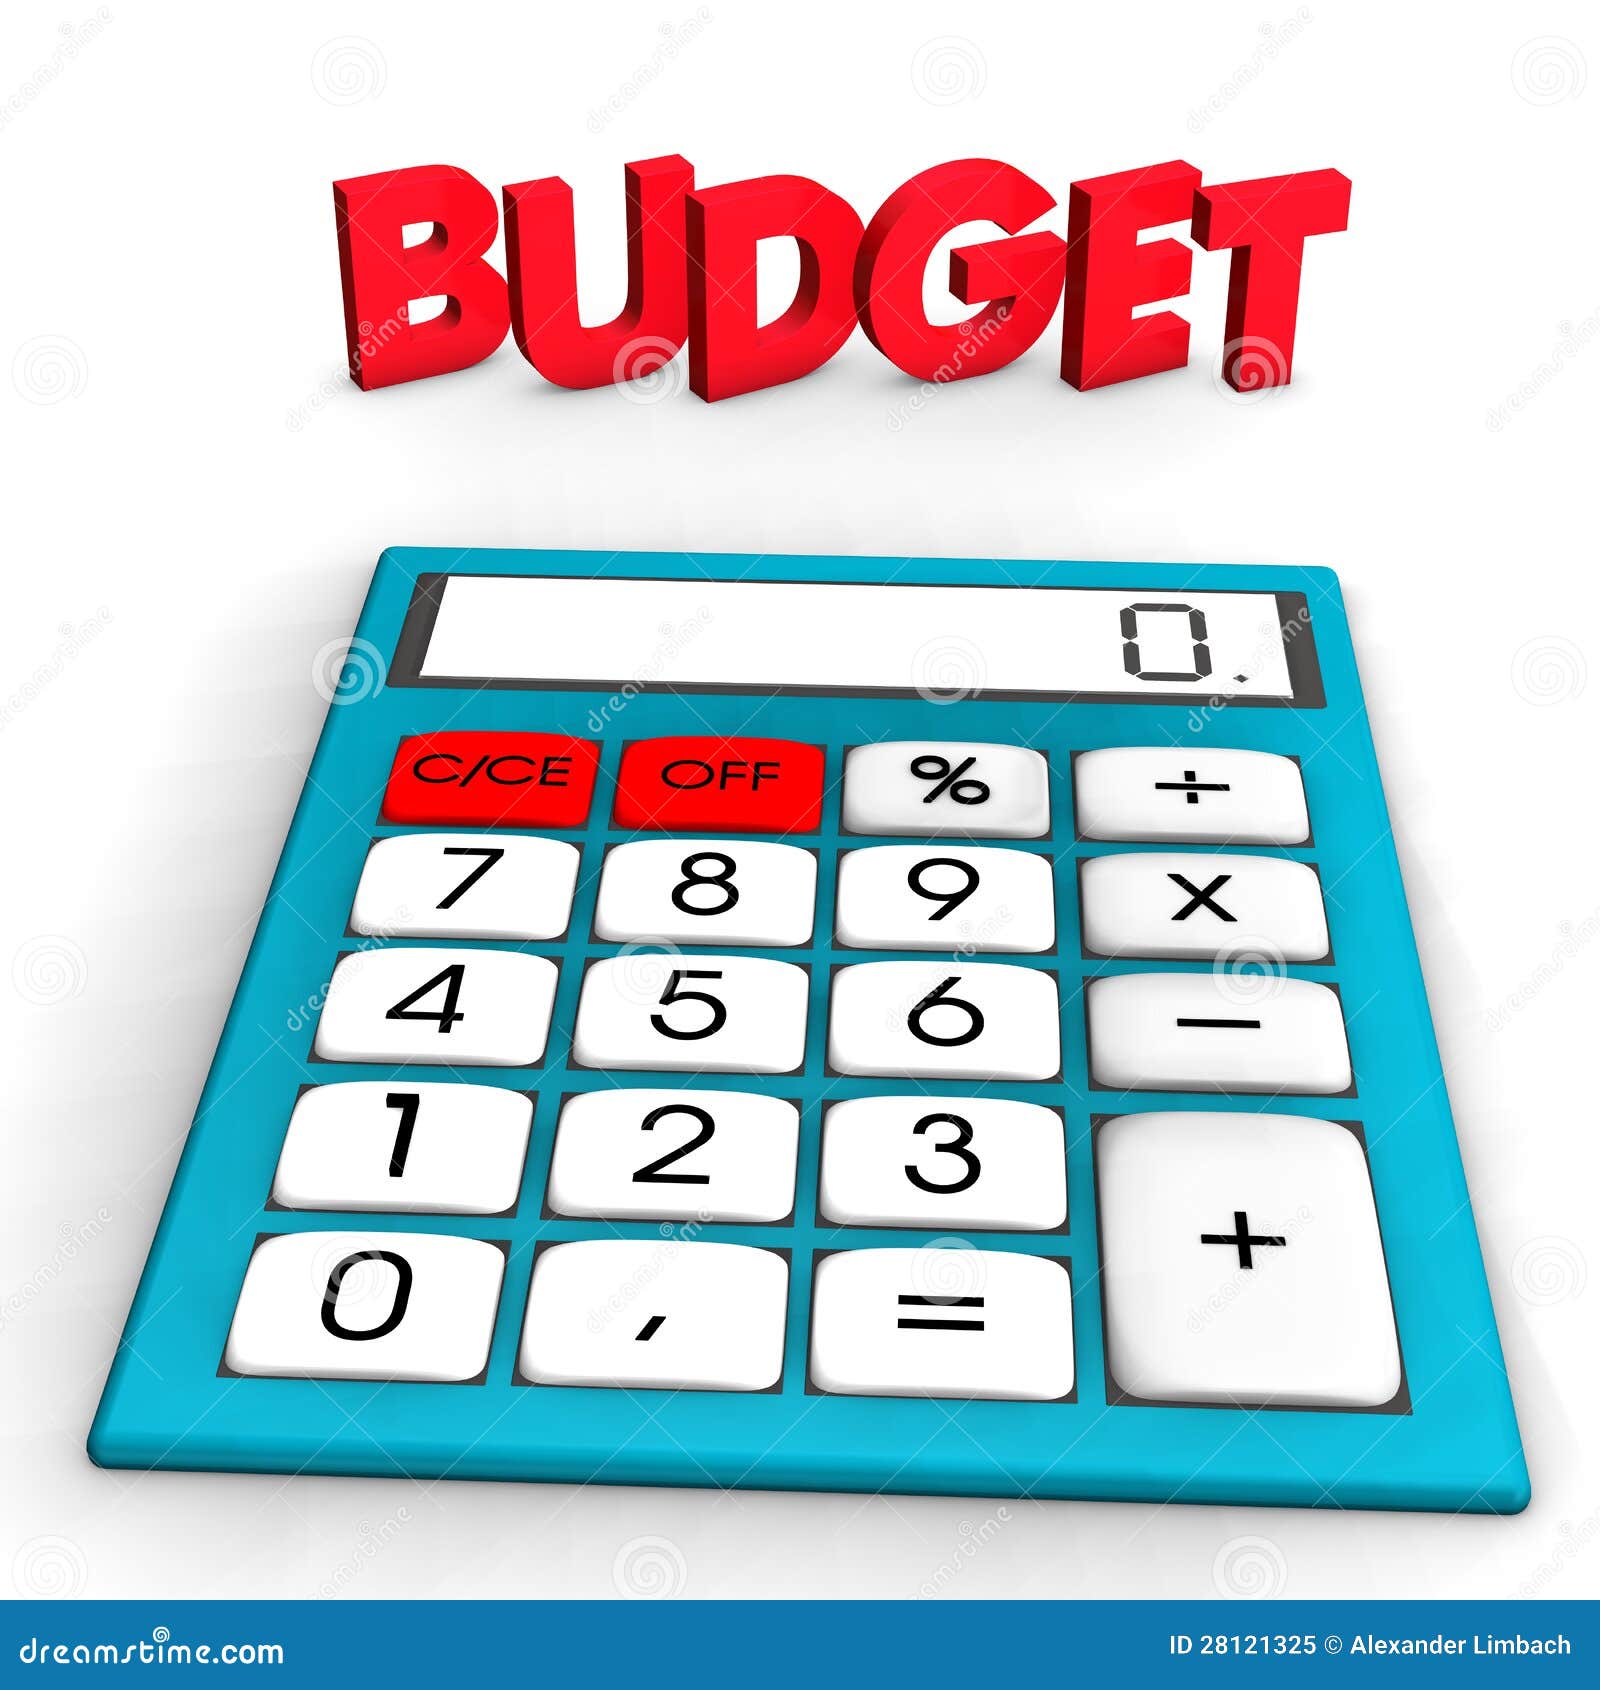 clipart pictures budget - photo #15